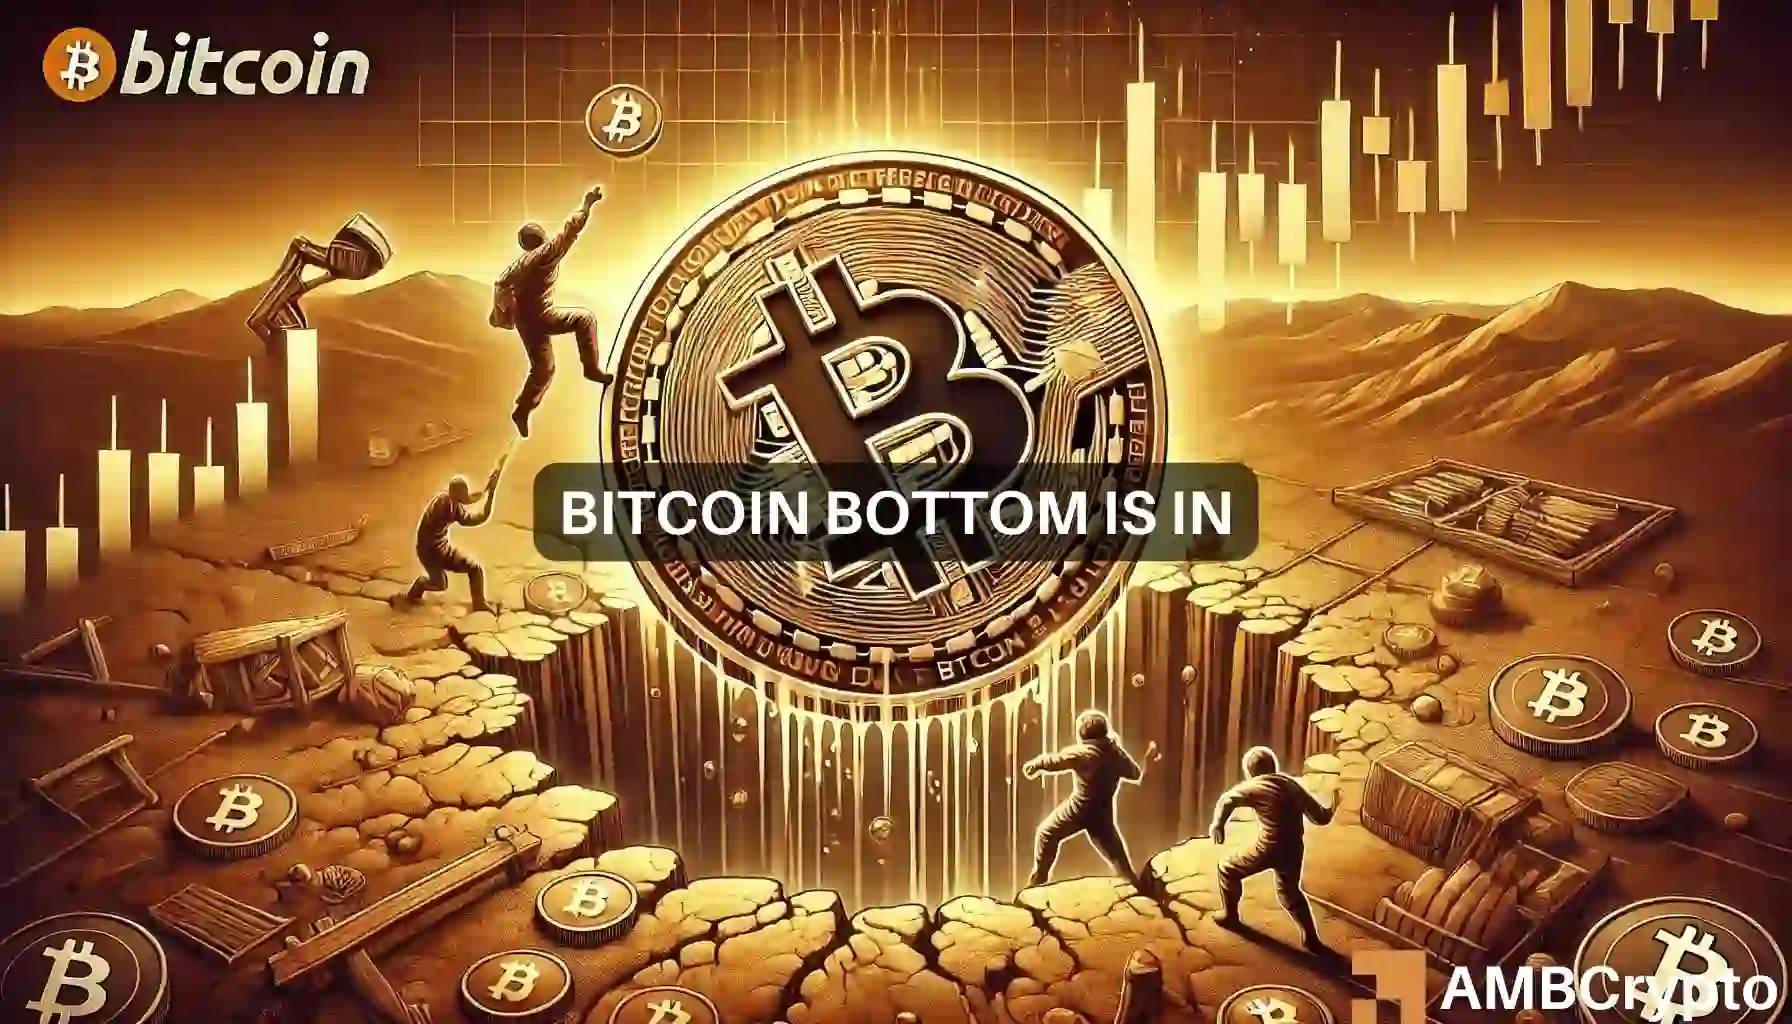 Bitcoin bottom in? Here’s what on-chain data says